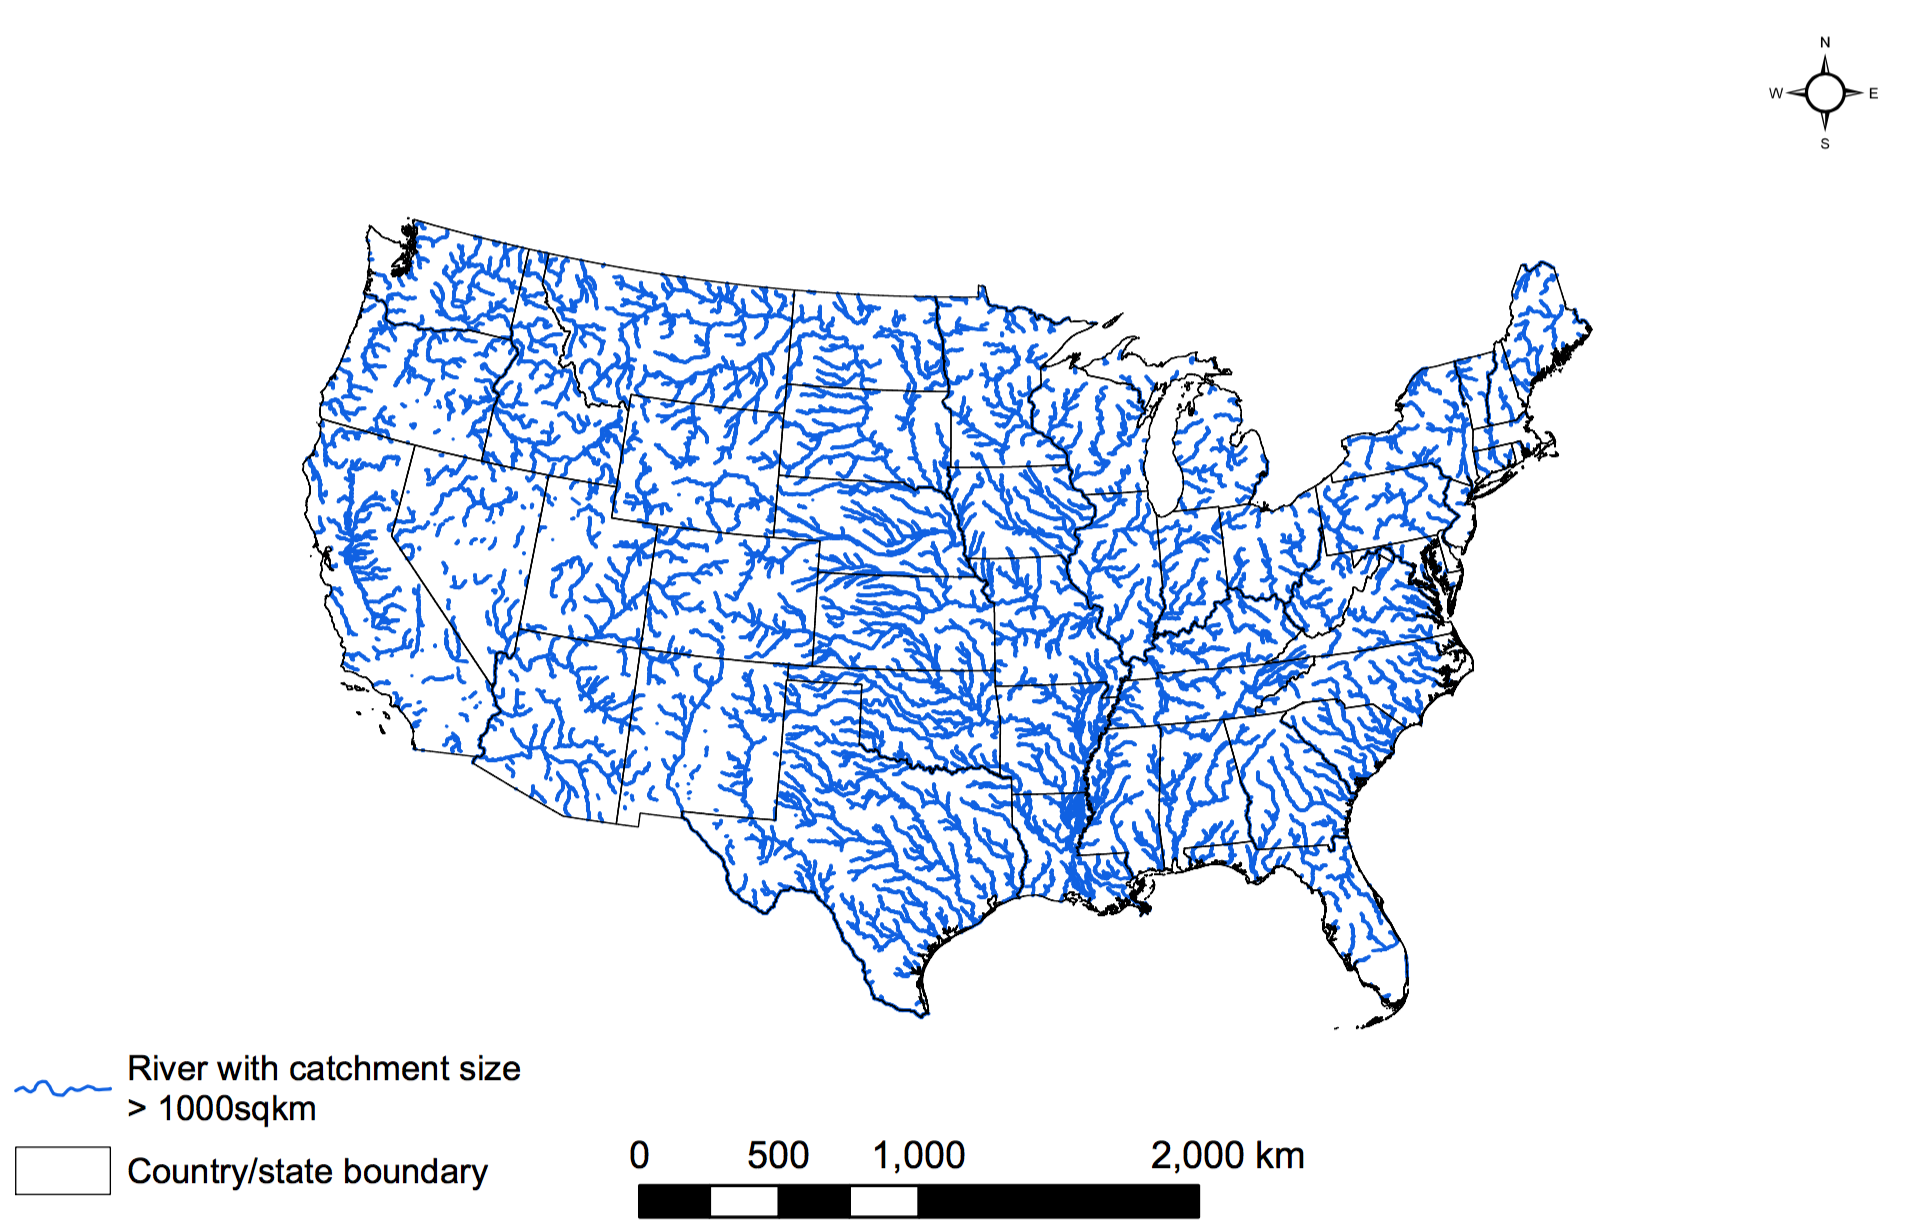 Large rivers (>1000km2 catchment size) in the USA.